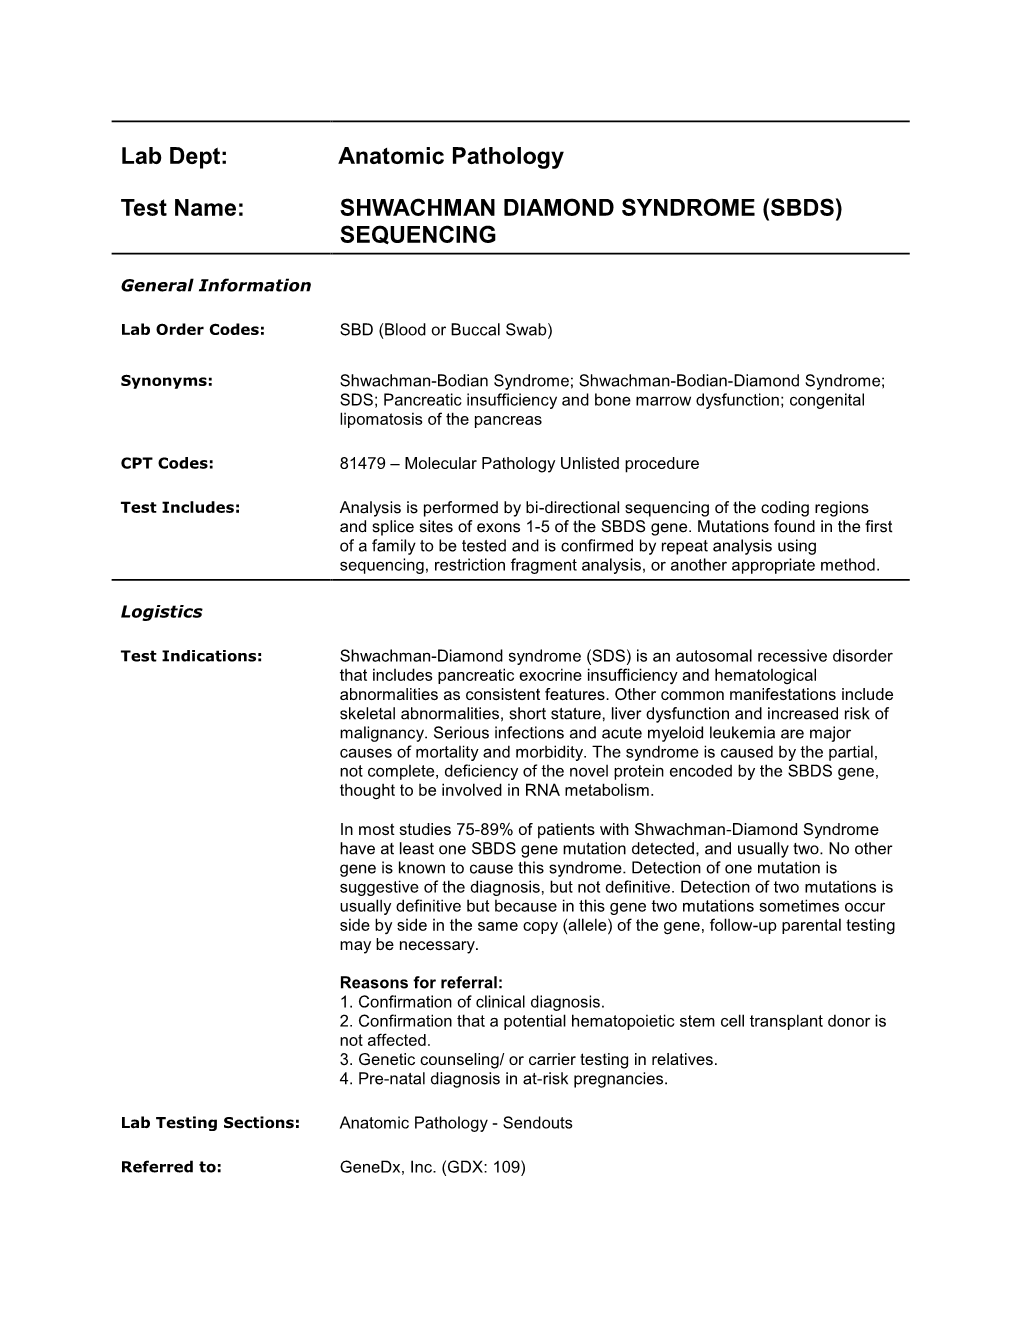 Shwachman Diamond Syndrome (Sbds) Sequencing